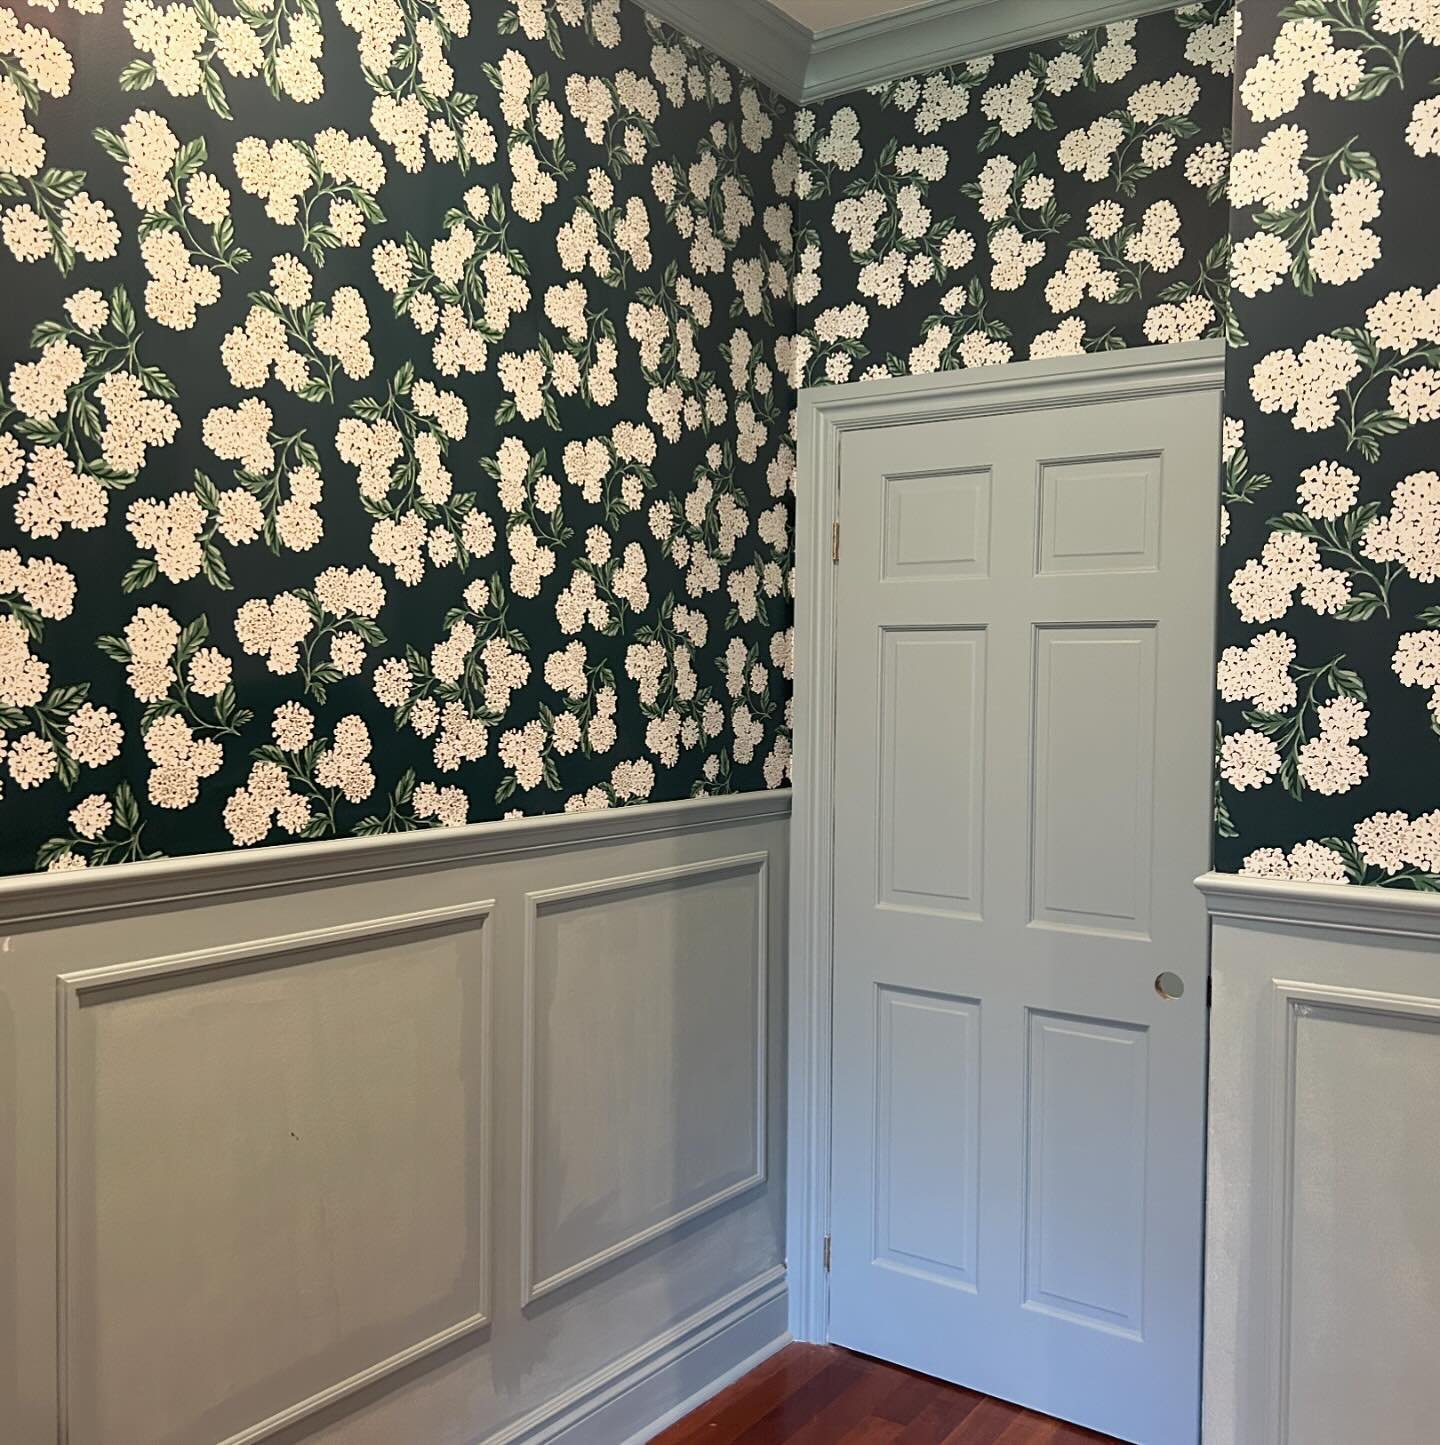 Because this wall molding/paint/wallpaper combo deserves a permanent spot on our feed. #ProjectTerracotta girls bedroom is feeling whimsical and pretty 🪻

Just as we intended in this creative collaboration with @juliadedeckerinteriors 

This wallpap